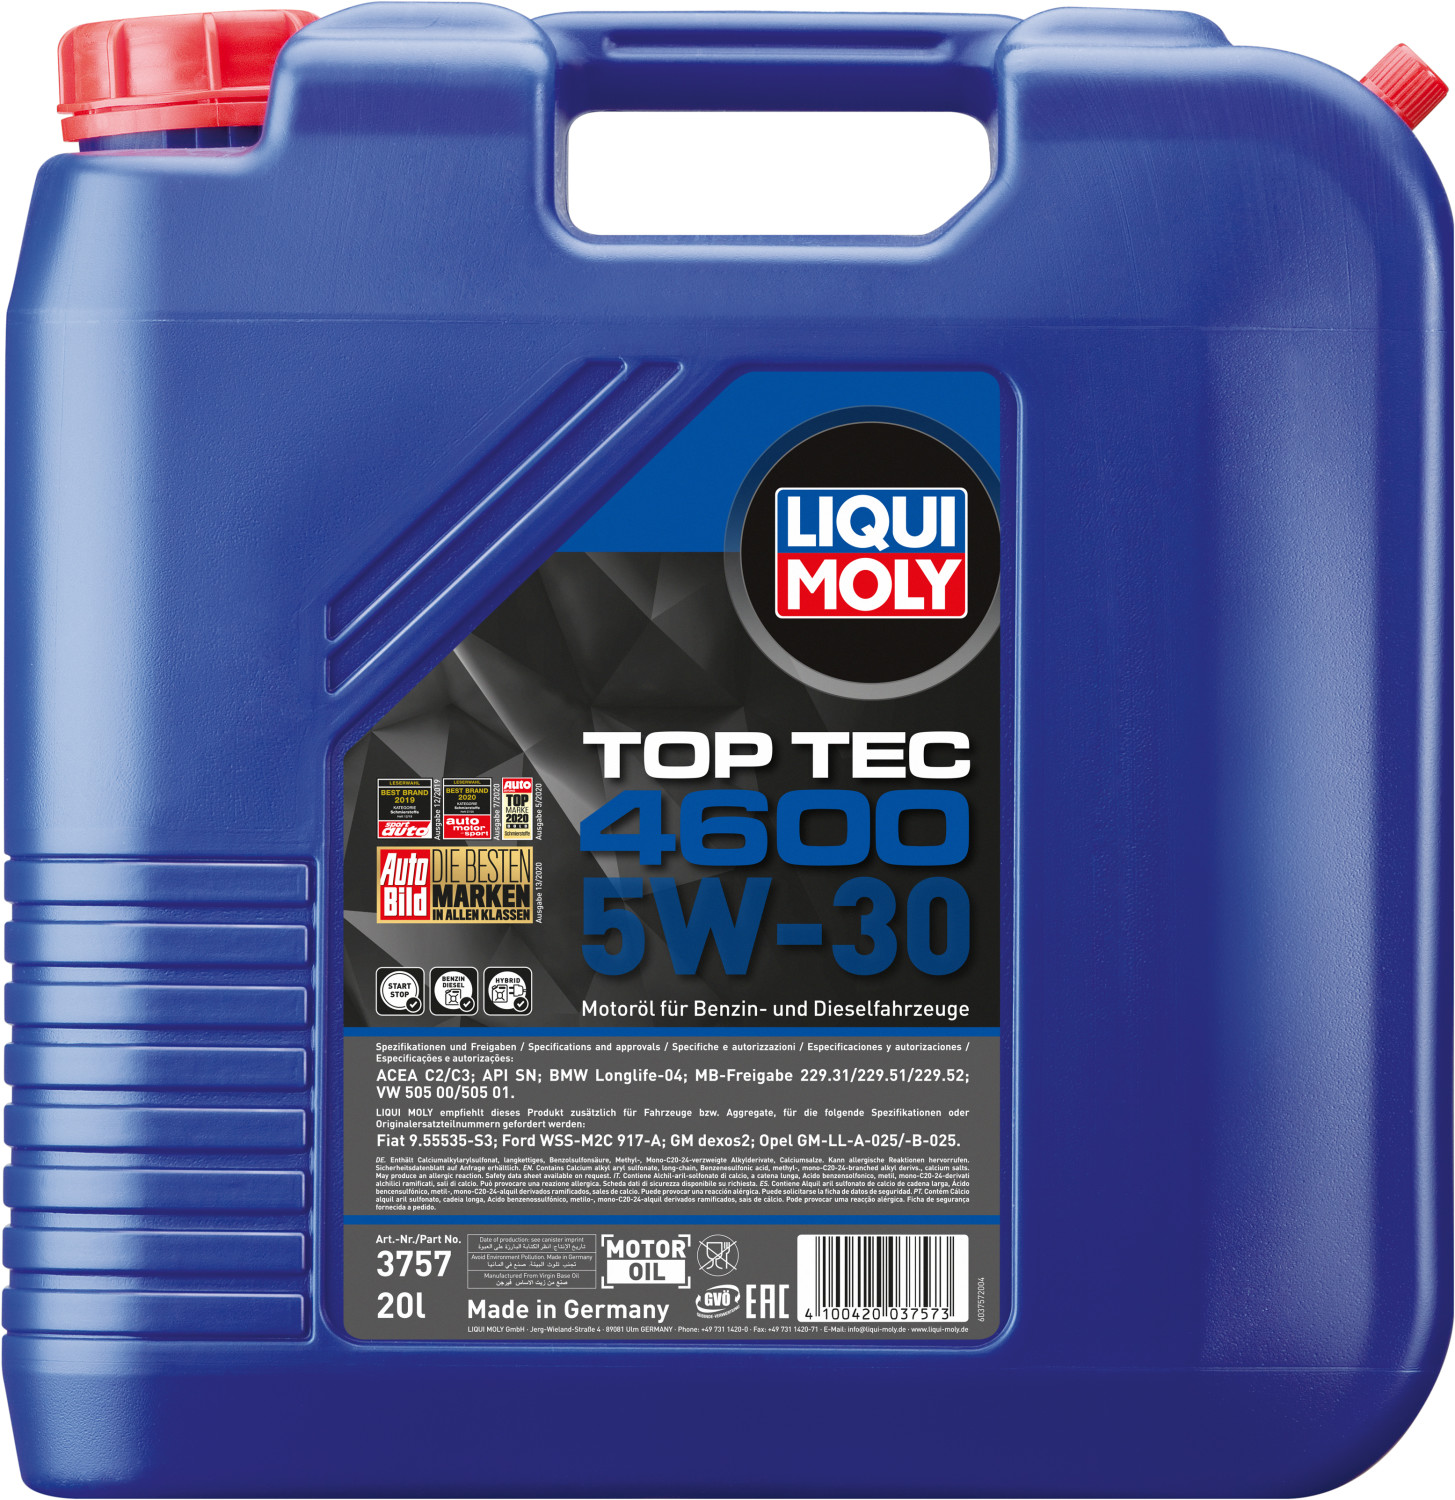 Buy LIQUI MOLY Top Tec 4600 5W-30 from £14.97 (Today) – Best Deals on